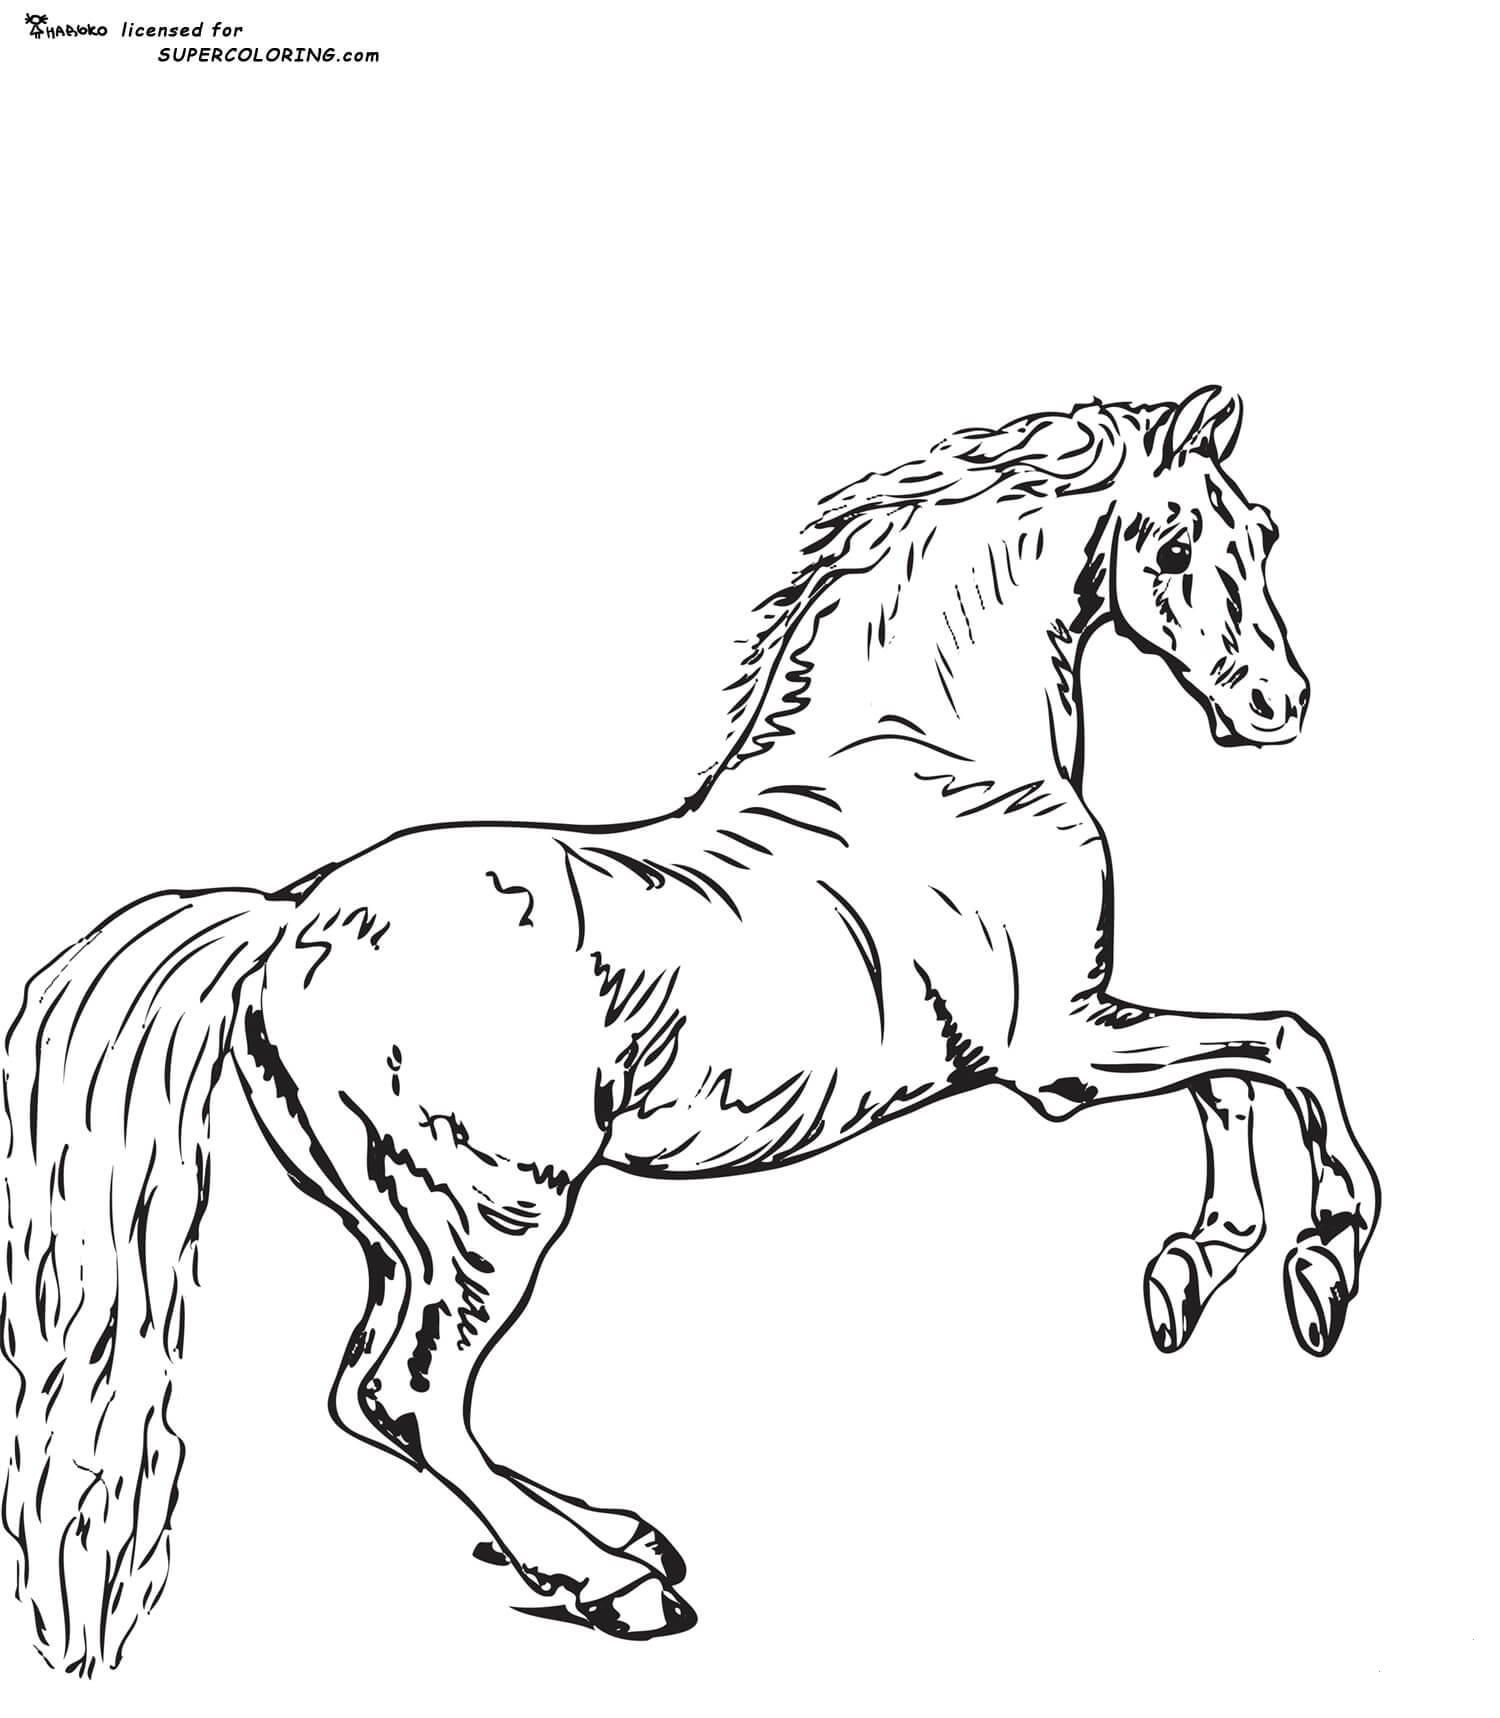 Whistlejacket By George Stubbs coloring page - ColouringPages